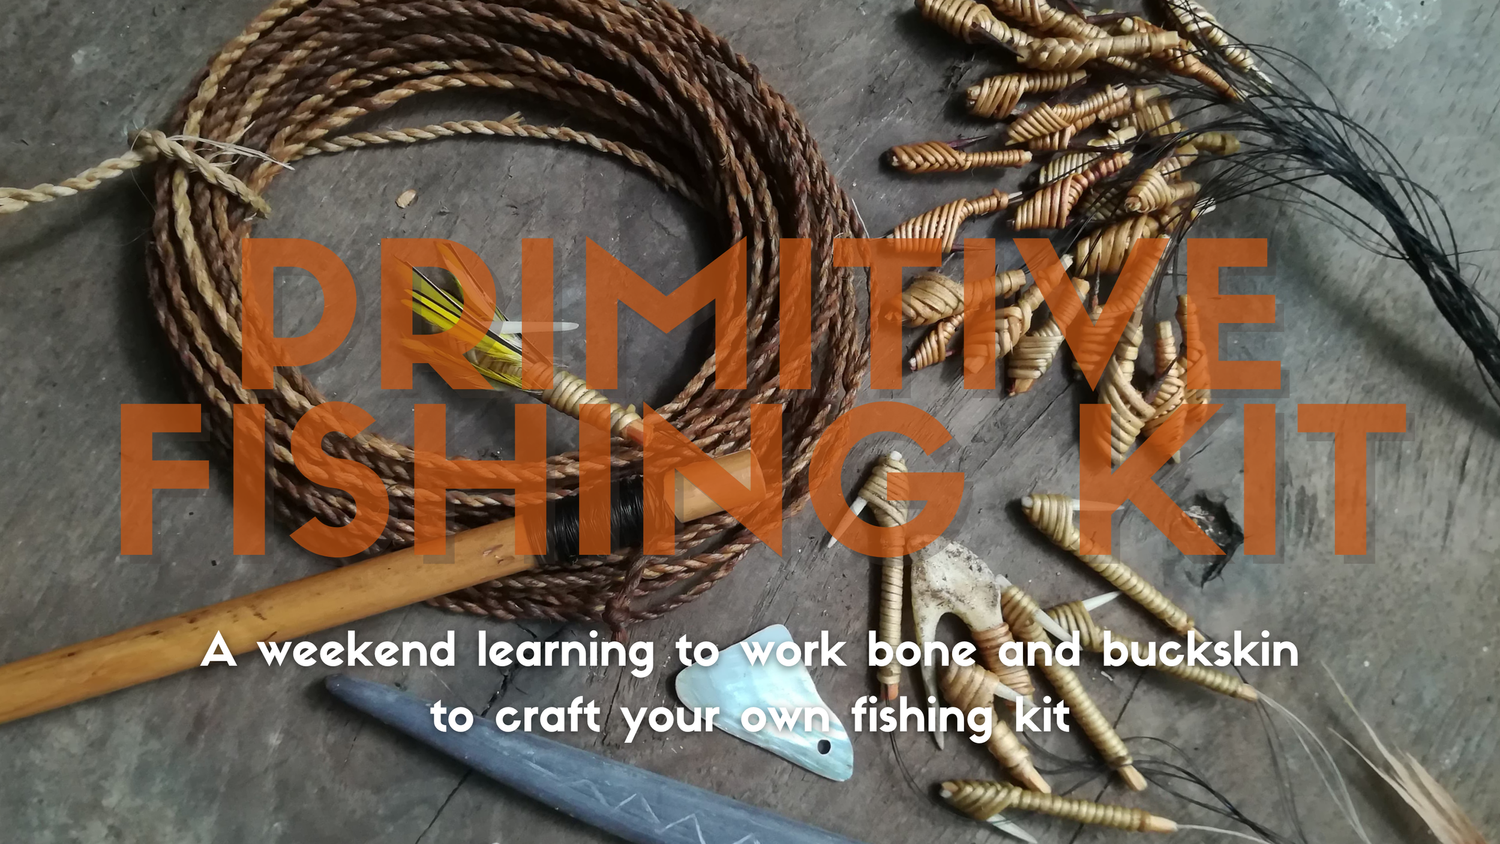 Primitive Fishing Kit Course - A weekend learning ancient crafts — Howl  Bushcraft